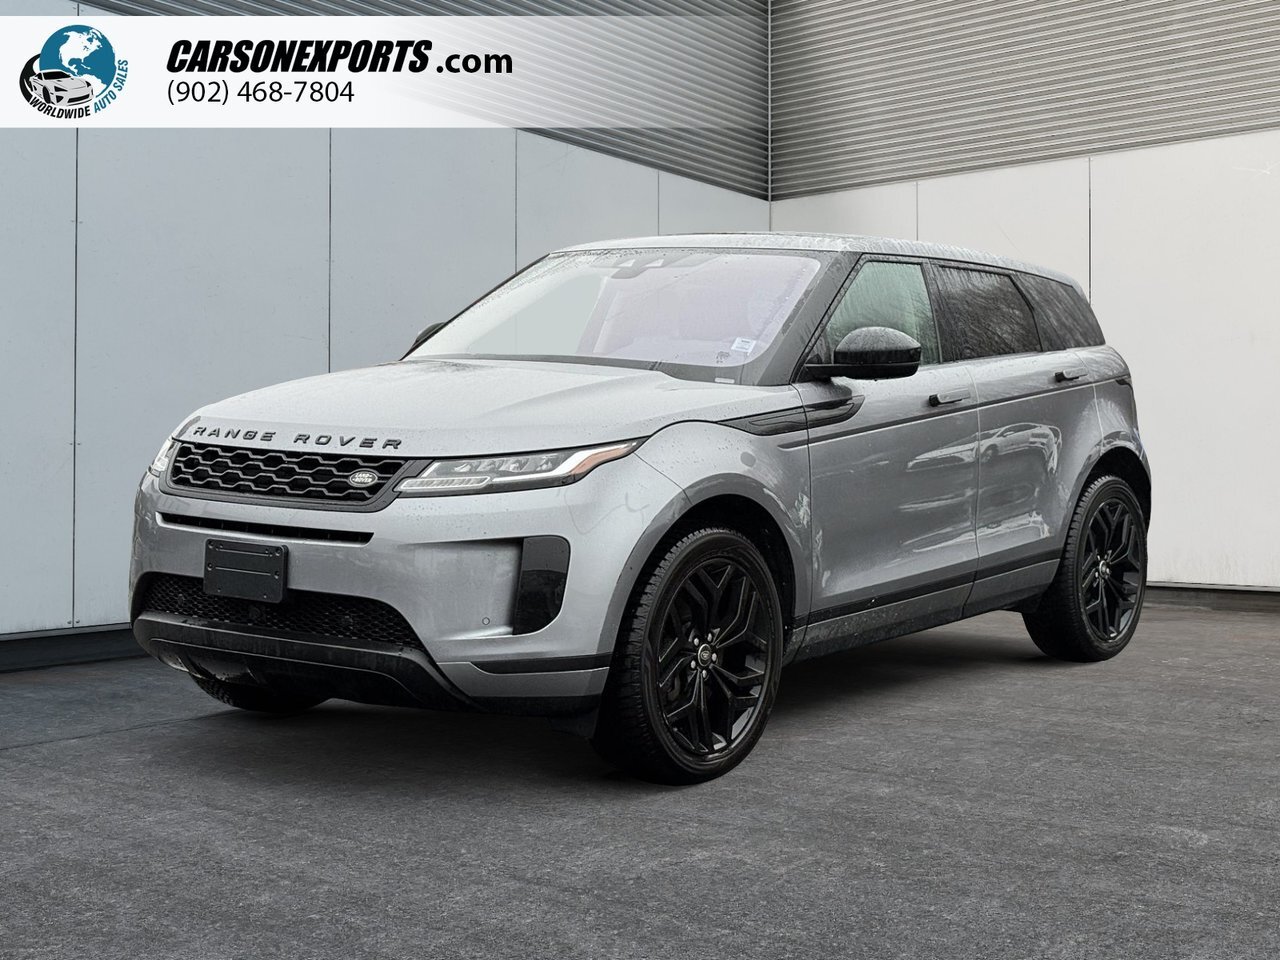 2020 Land Rover Range Rover Evoque S The best place to buy a used car. Period.